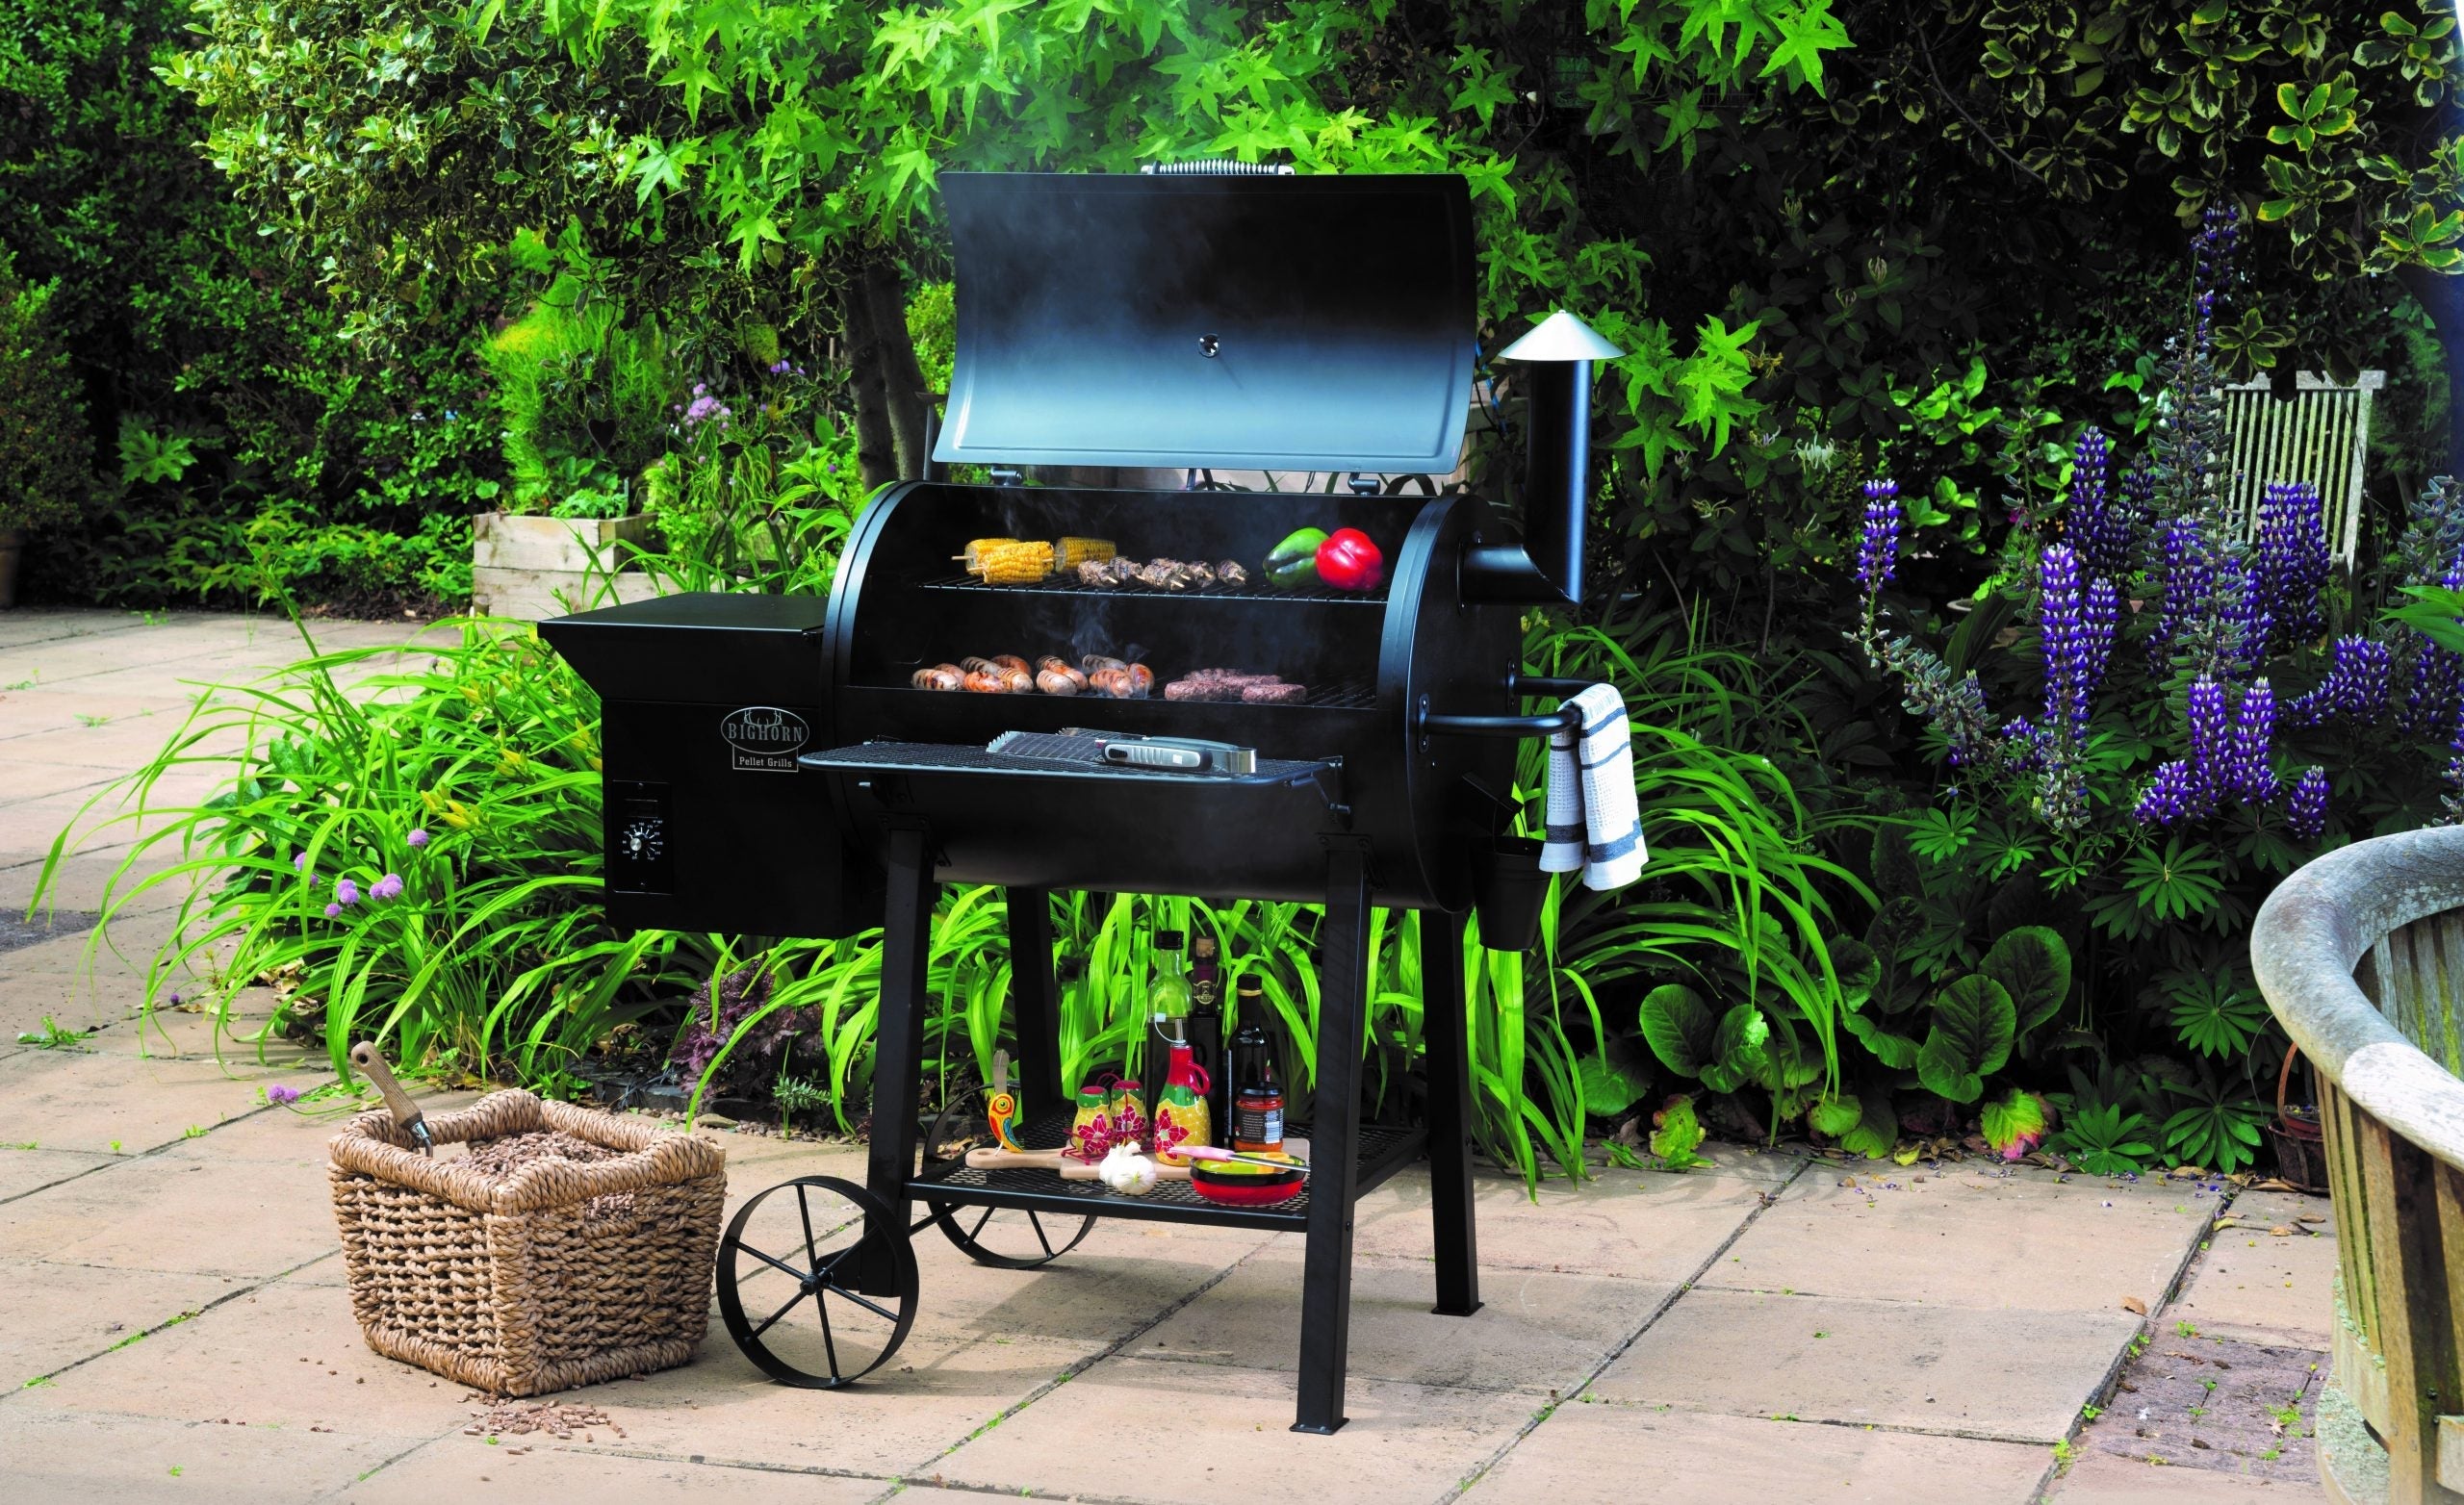 Lifestyle Big Horn Pellet Grill and Smoker LFS256 JD Catering Equipment Solutions Ltd